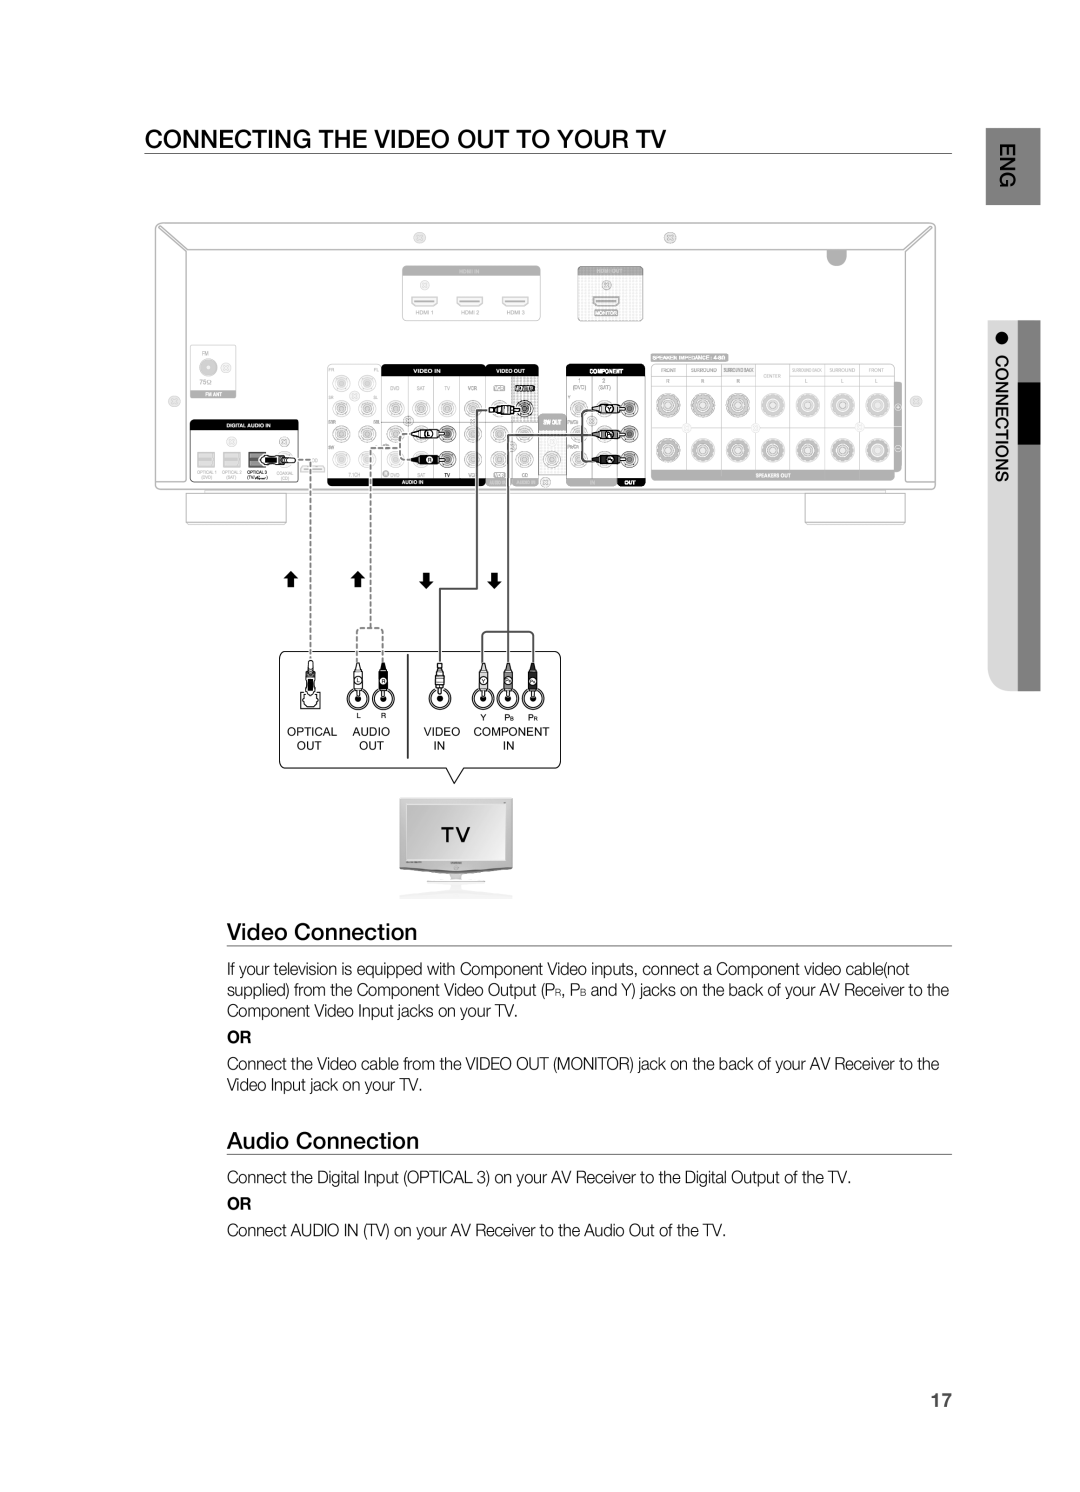 Samsung HT-AS730ST user manual Connecting the Video Out to your TV, Video Connection, Audio Connection 